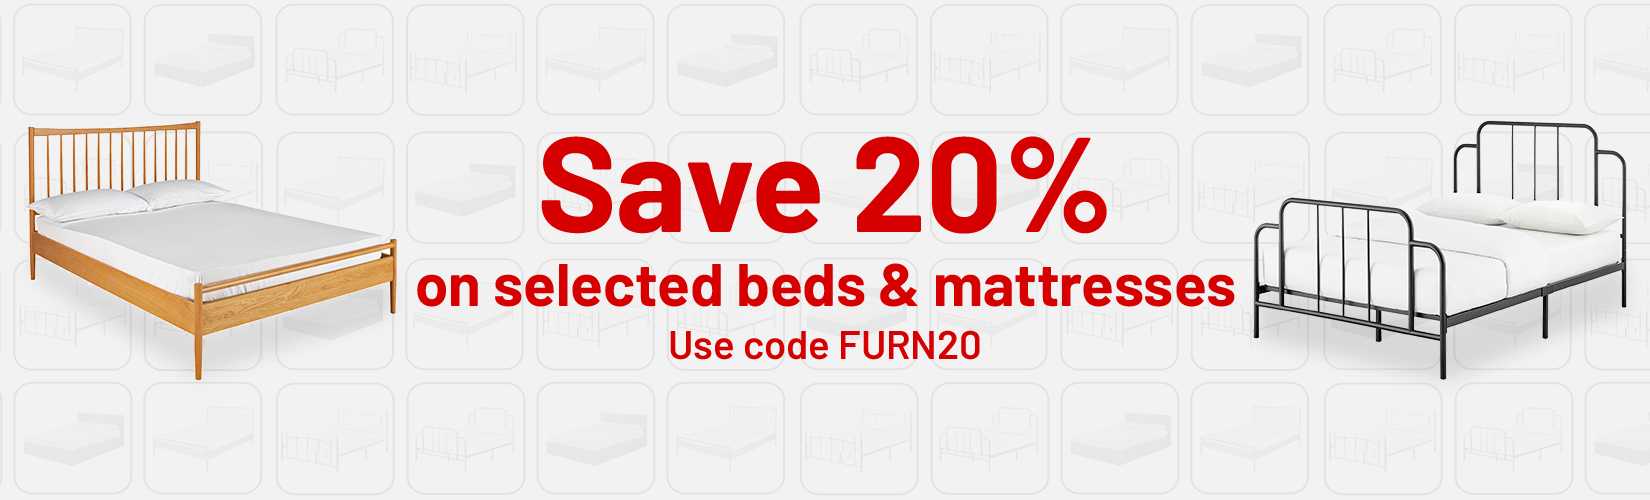 Save 20% on selected beds & mattresses with code FURN20. Apply code at the checkout.